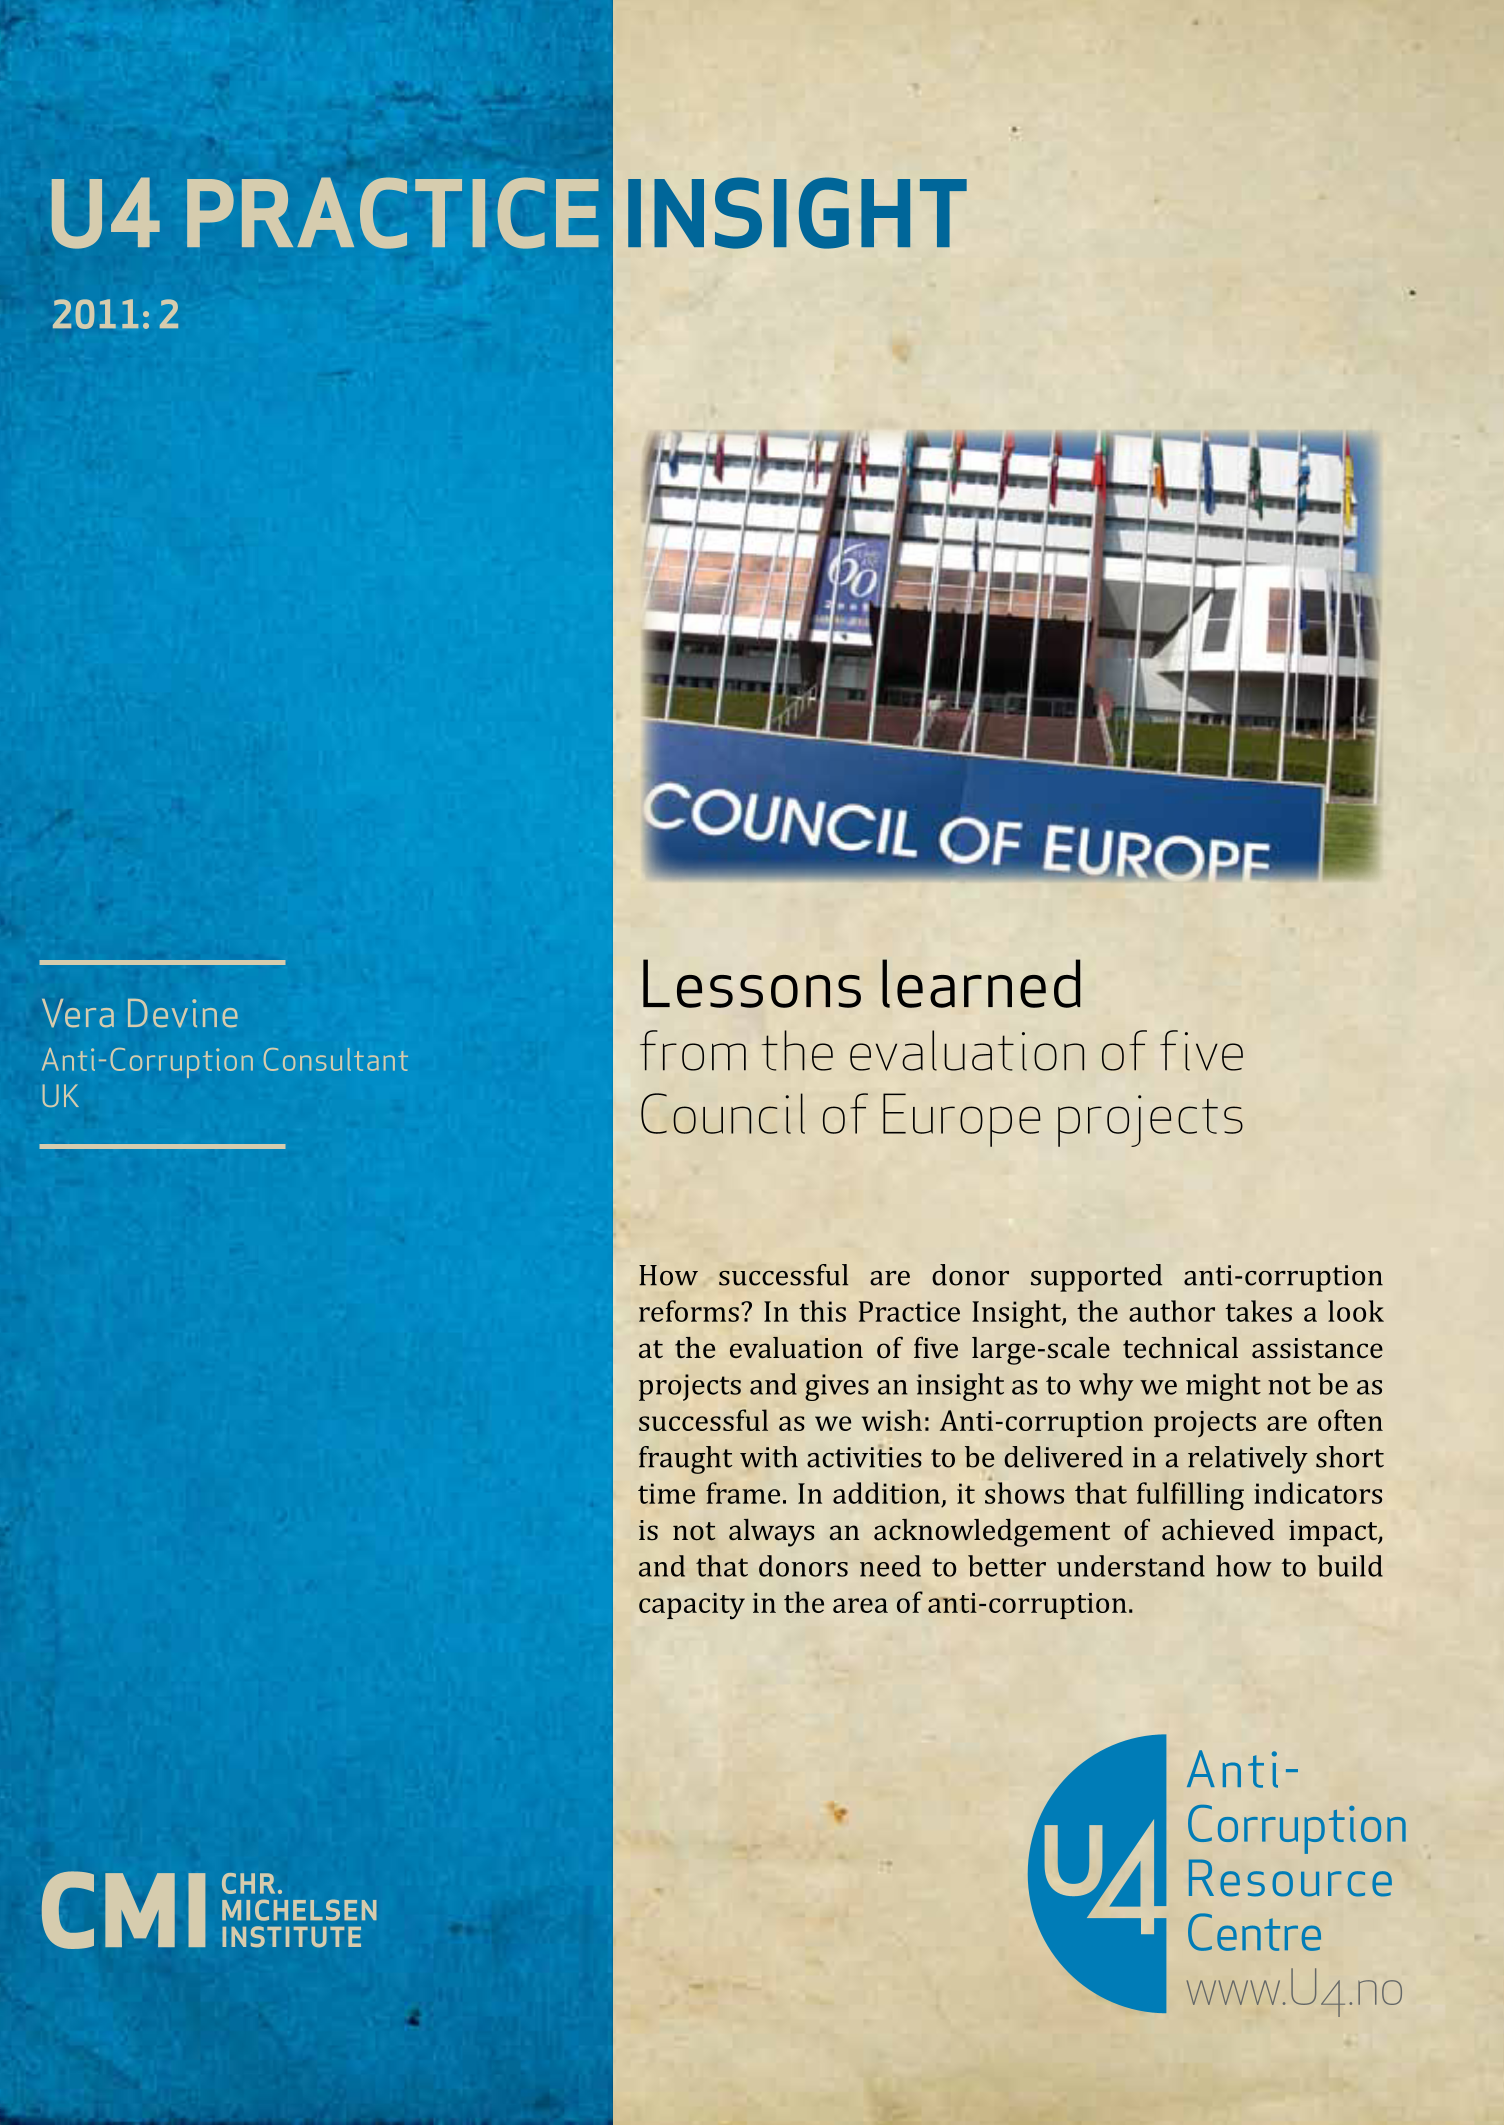 Lessons learned from the evaluation of five Council of Europe projects